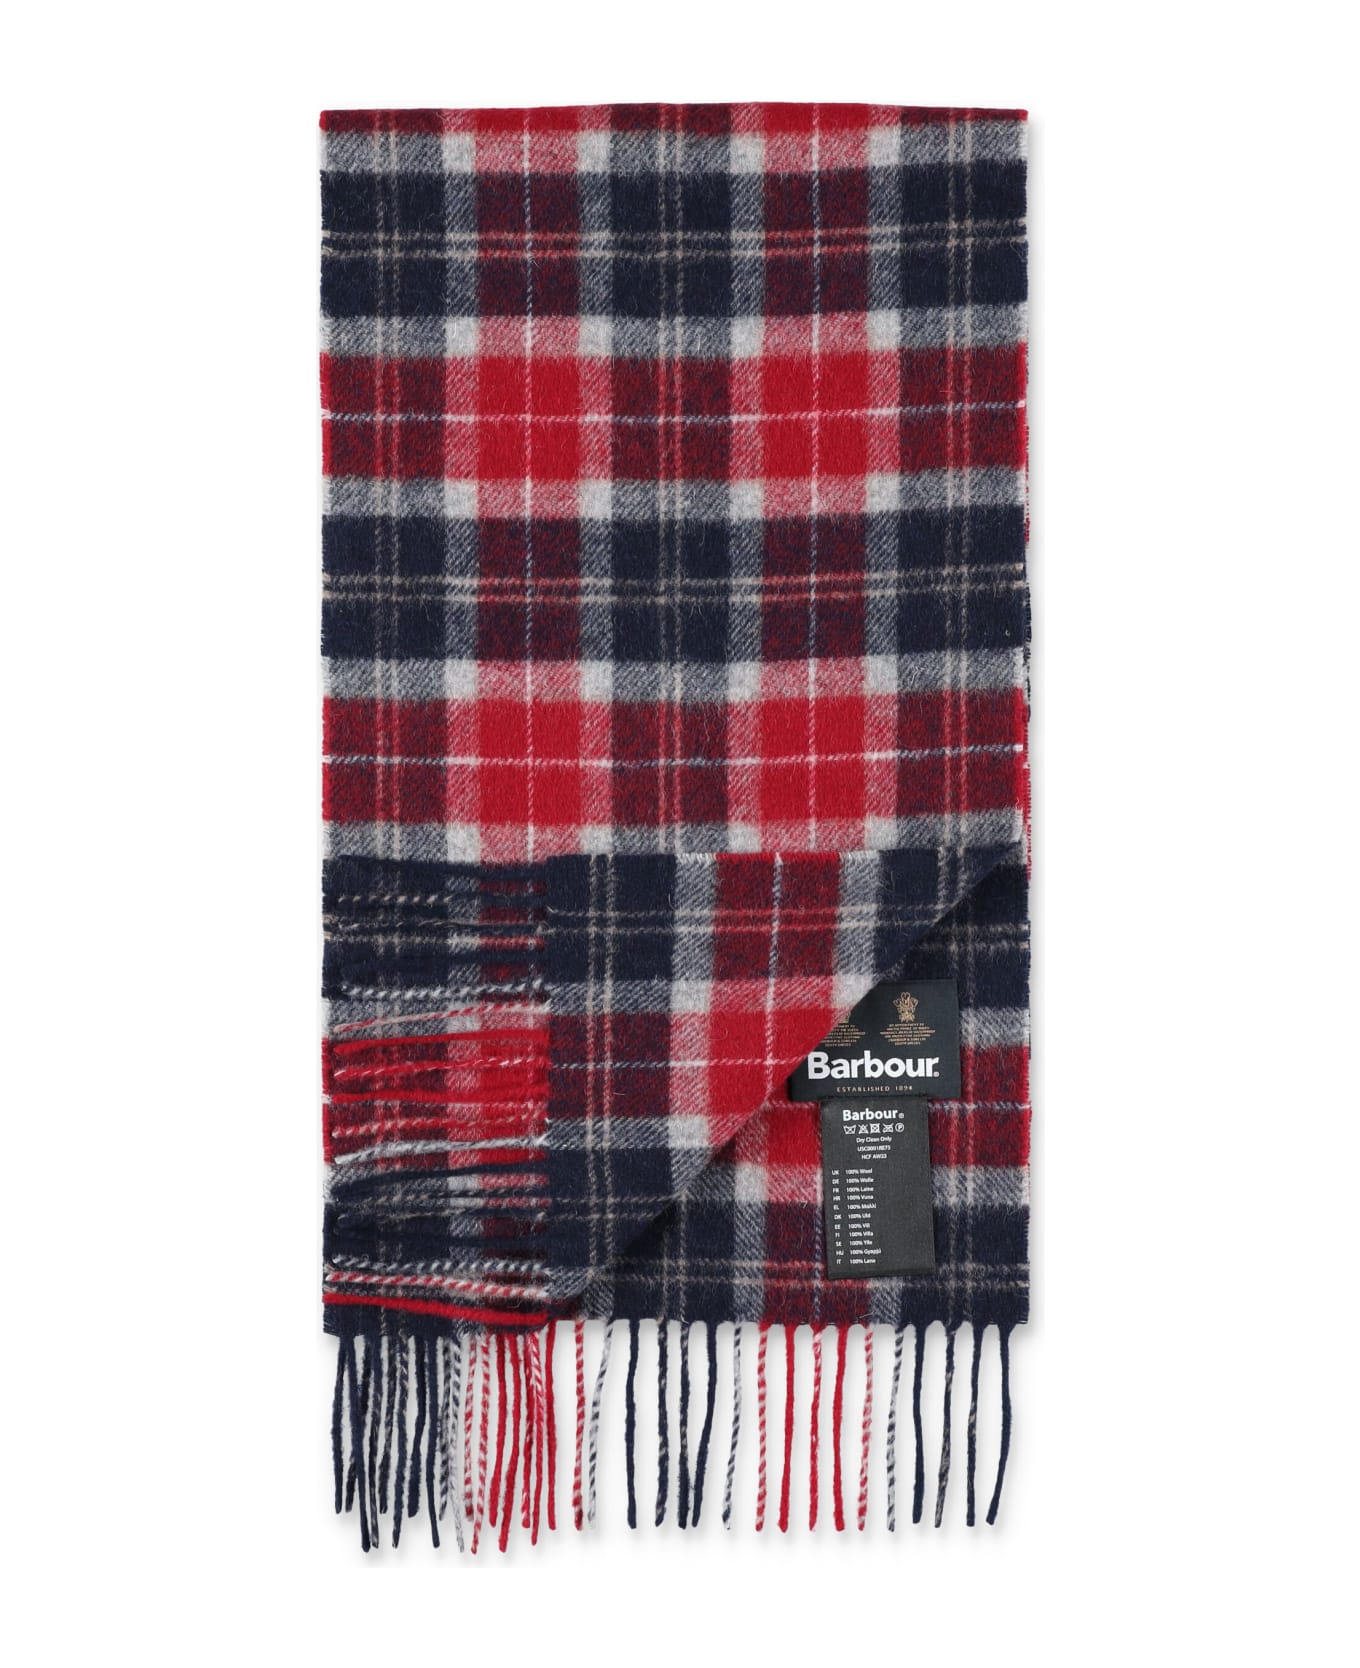 Barbour Scarf Check - RED/NAVY TARTAN